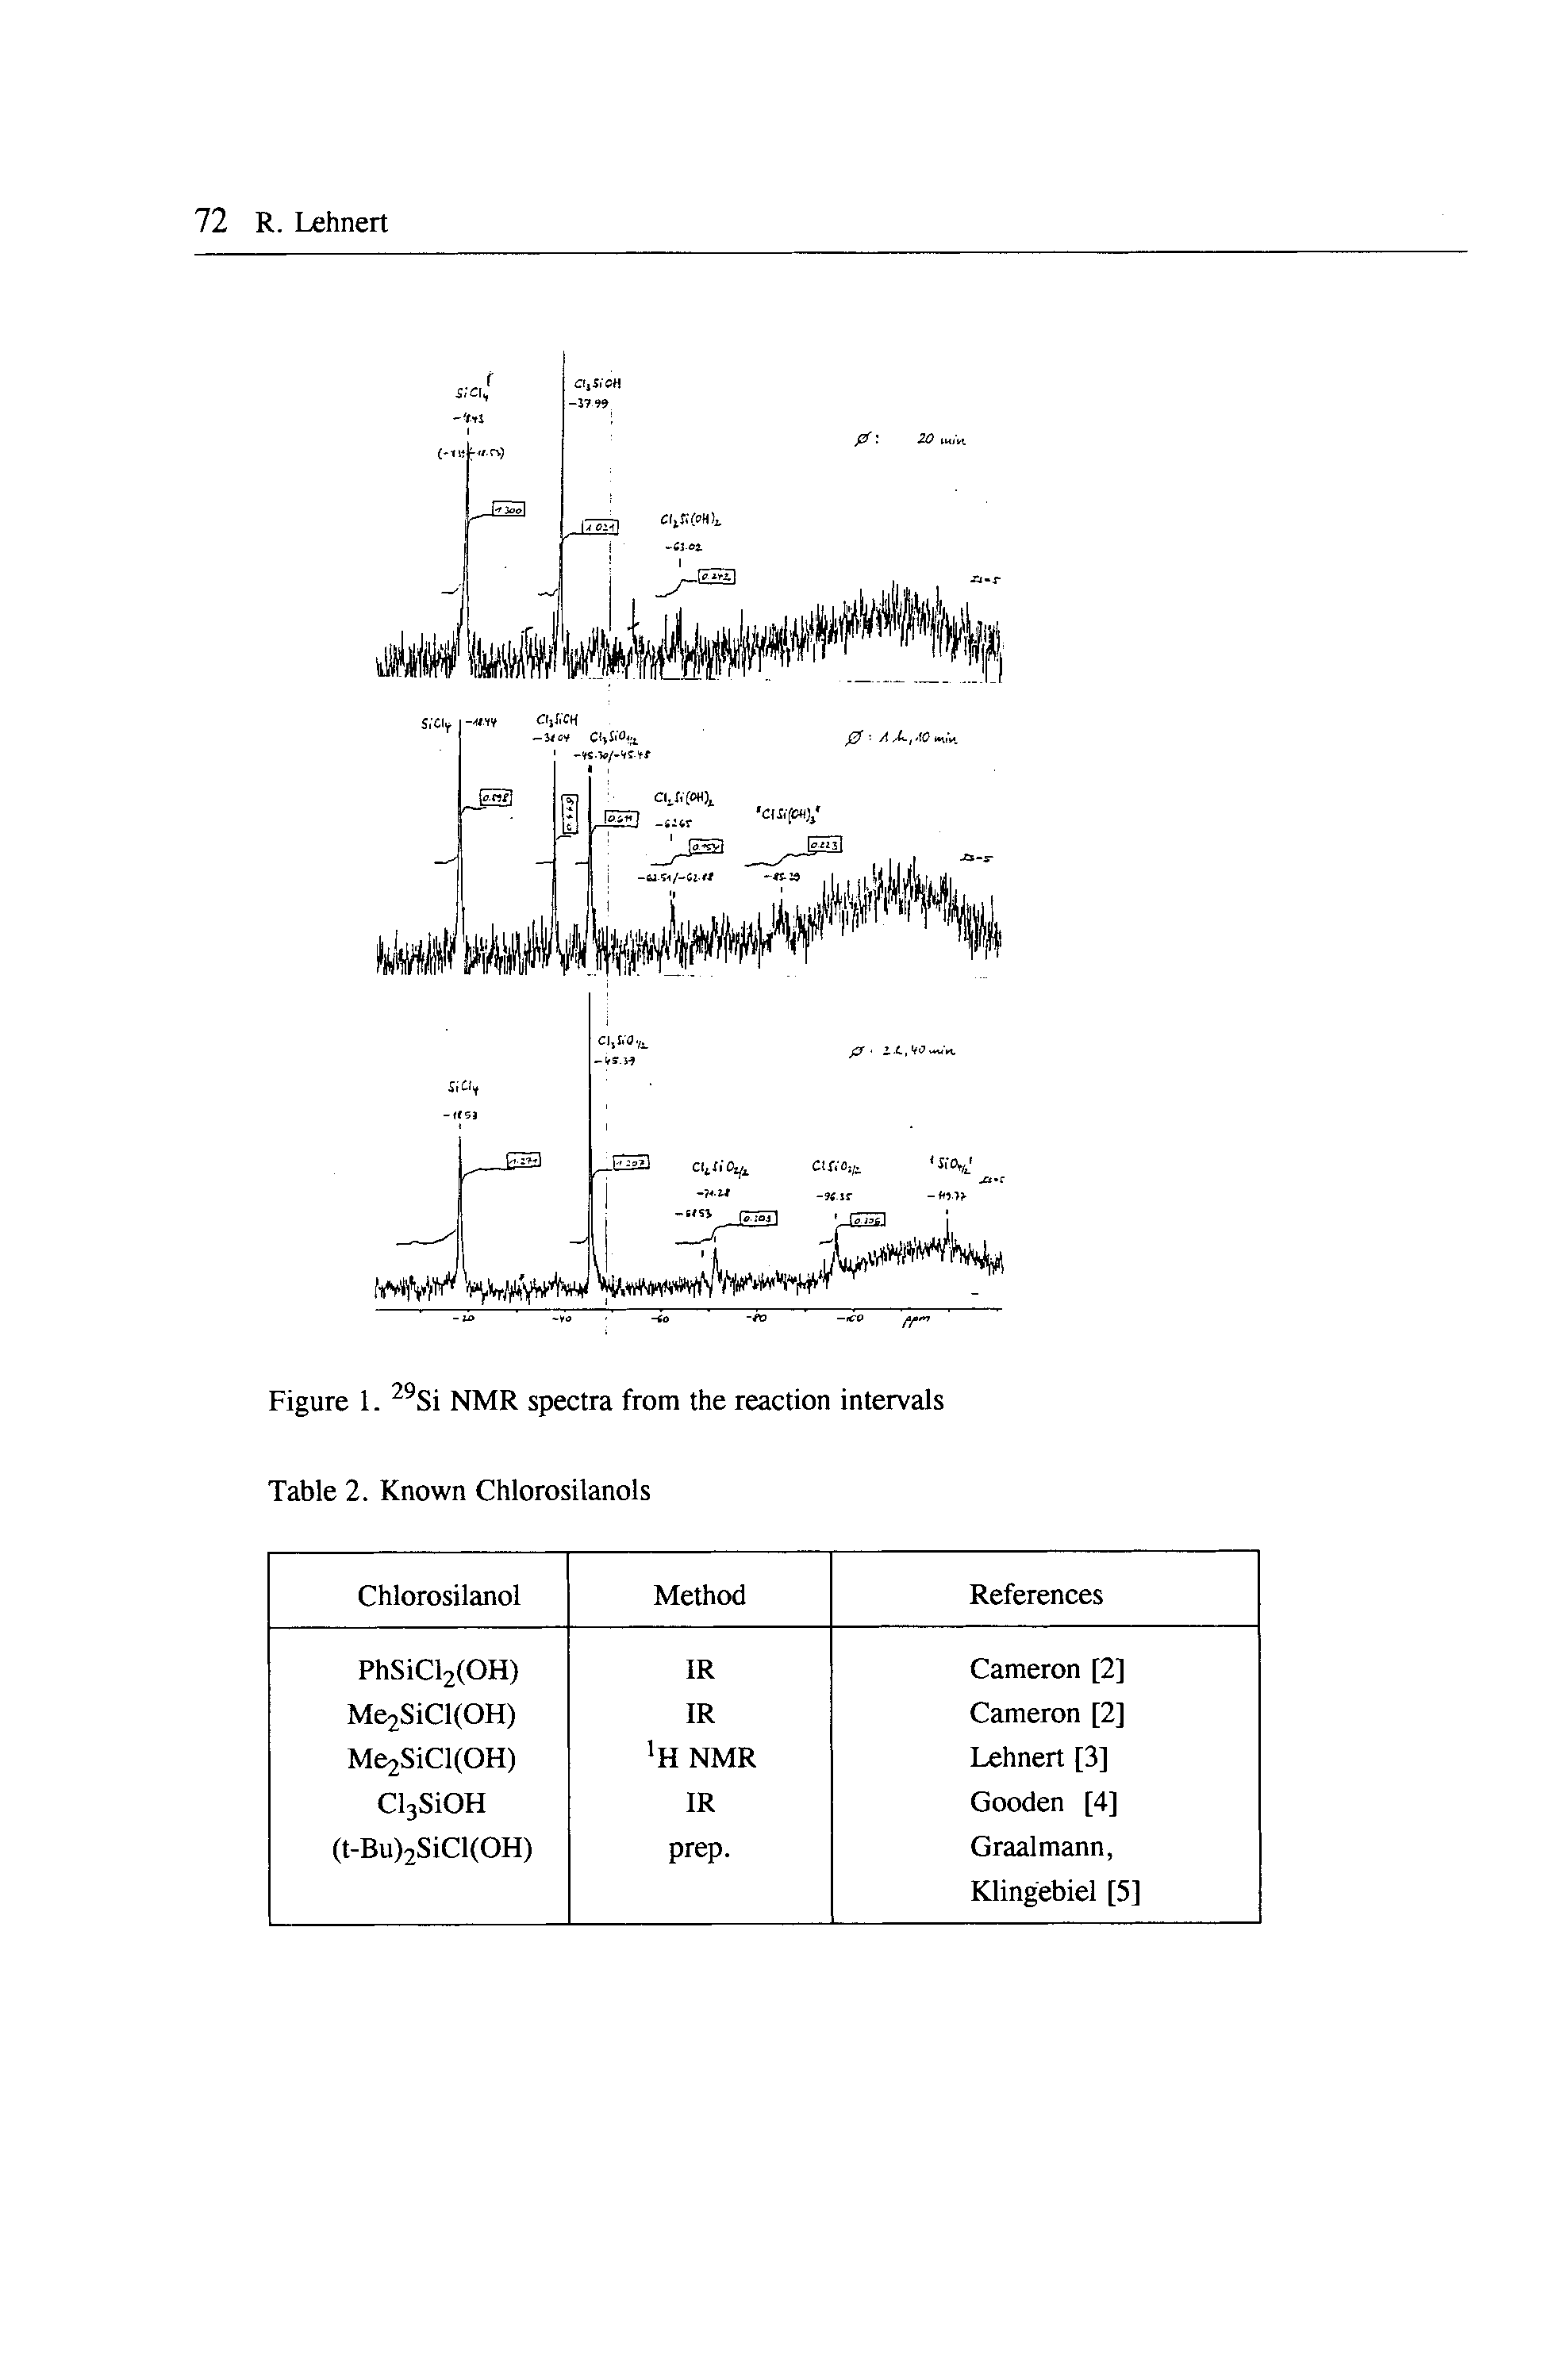 Figure 1. 29Si NMR spectra from the reaction intervals Table 2. Known Chlorosilanols...